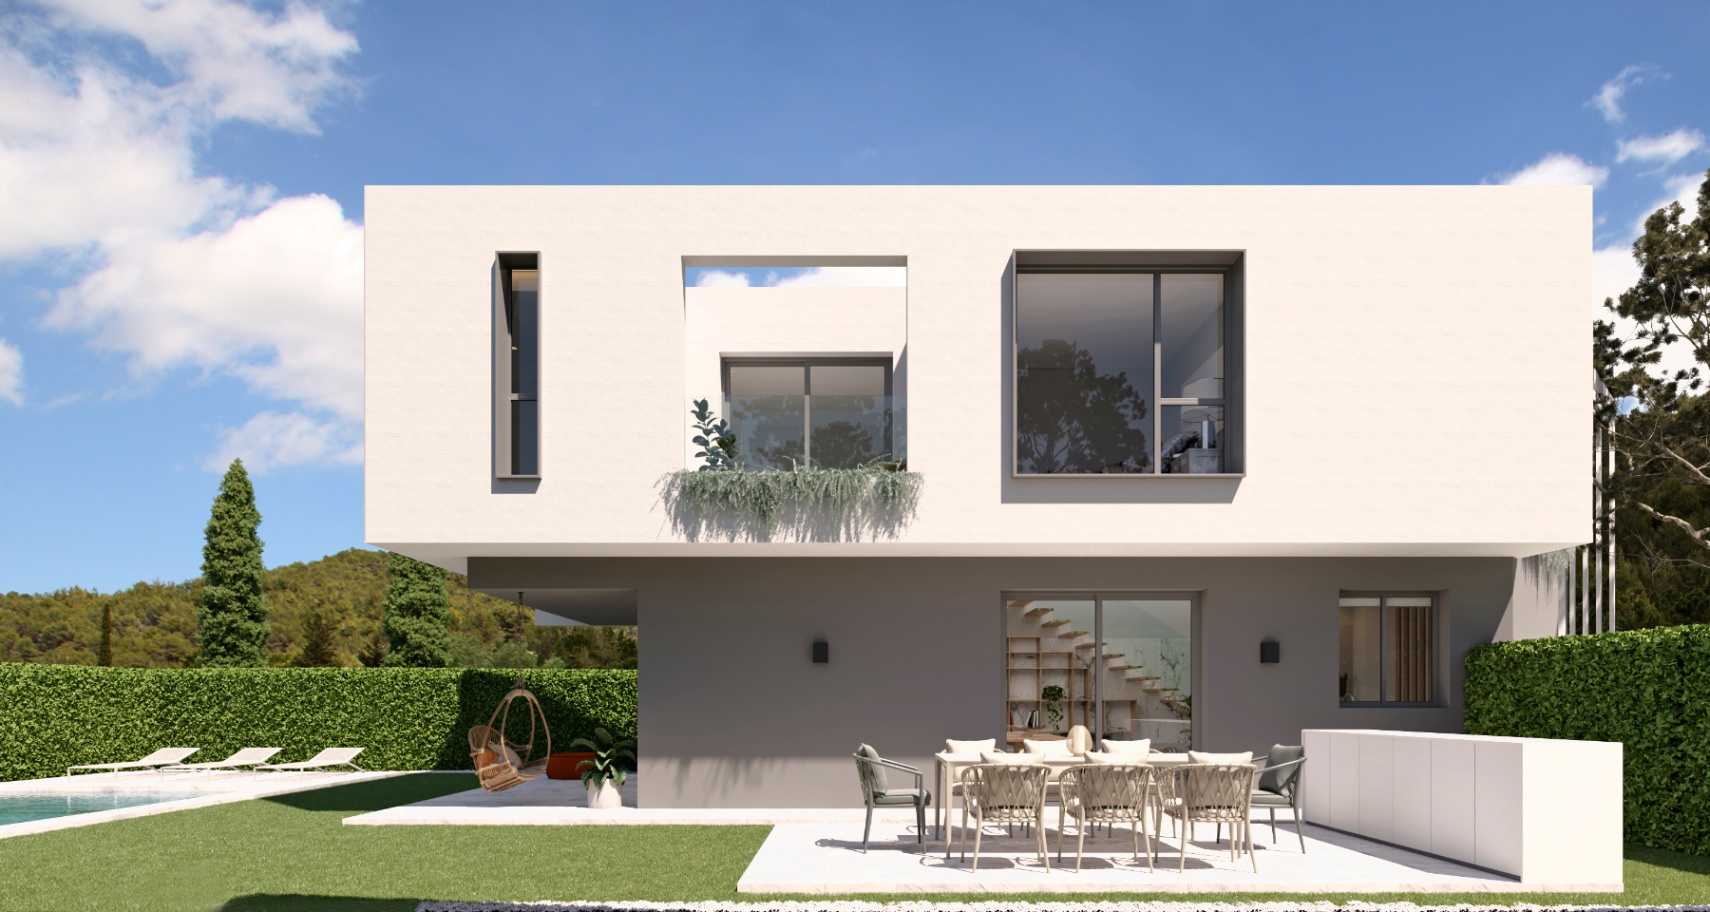 FOR SALE 21 DETACHED VILLAS WITH GARDEN AND POOL IN ALICANTE